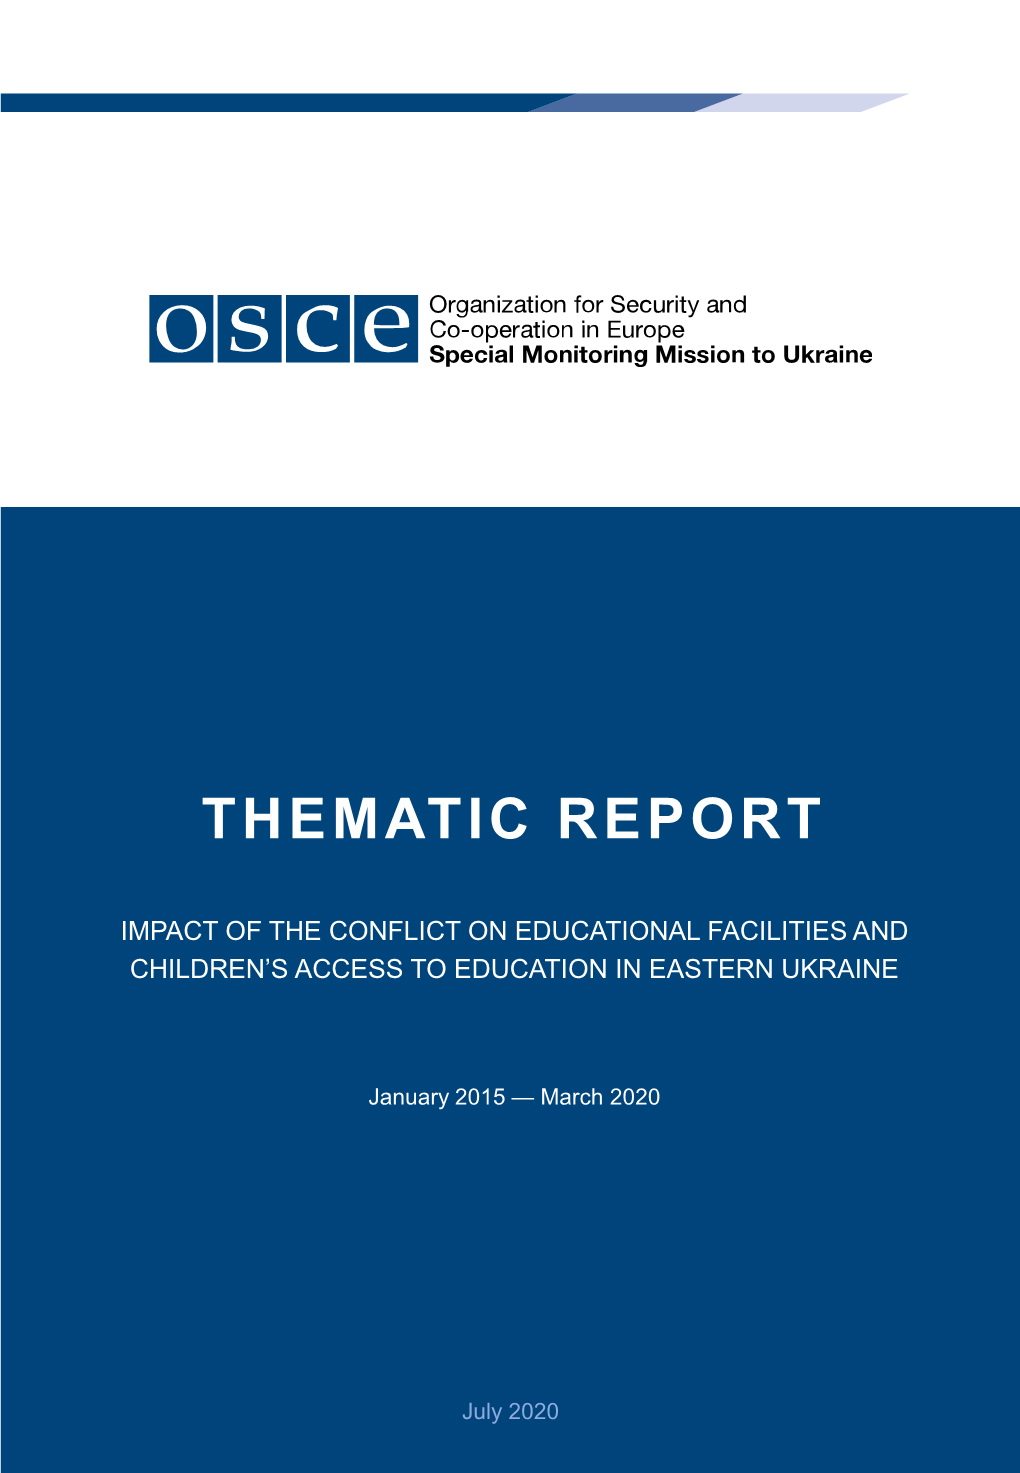 Report on Access to Education